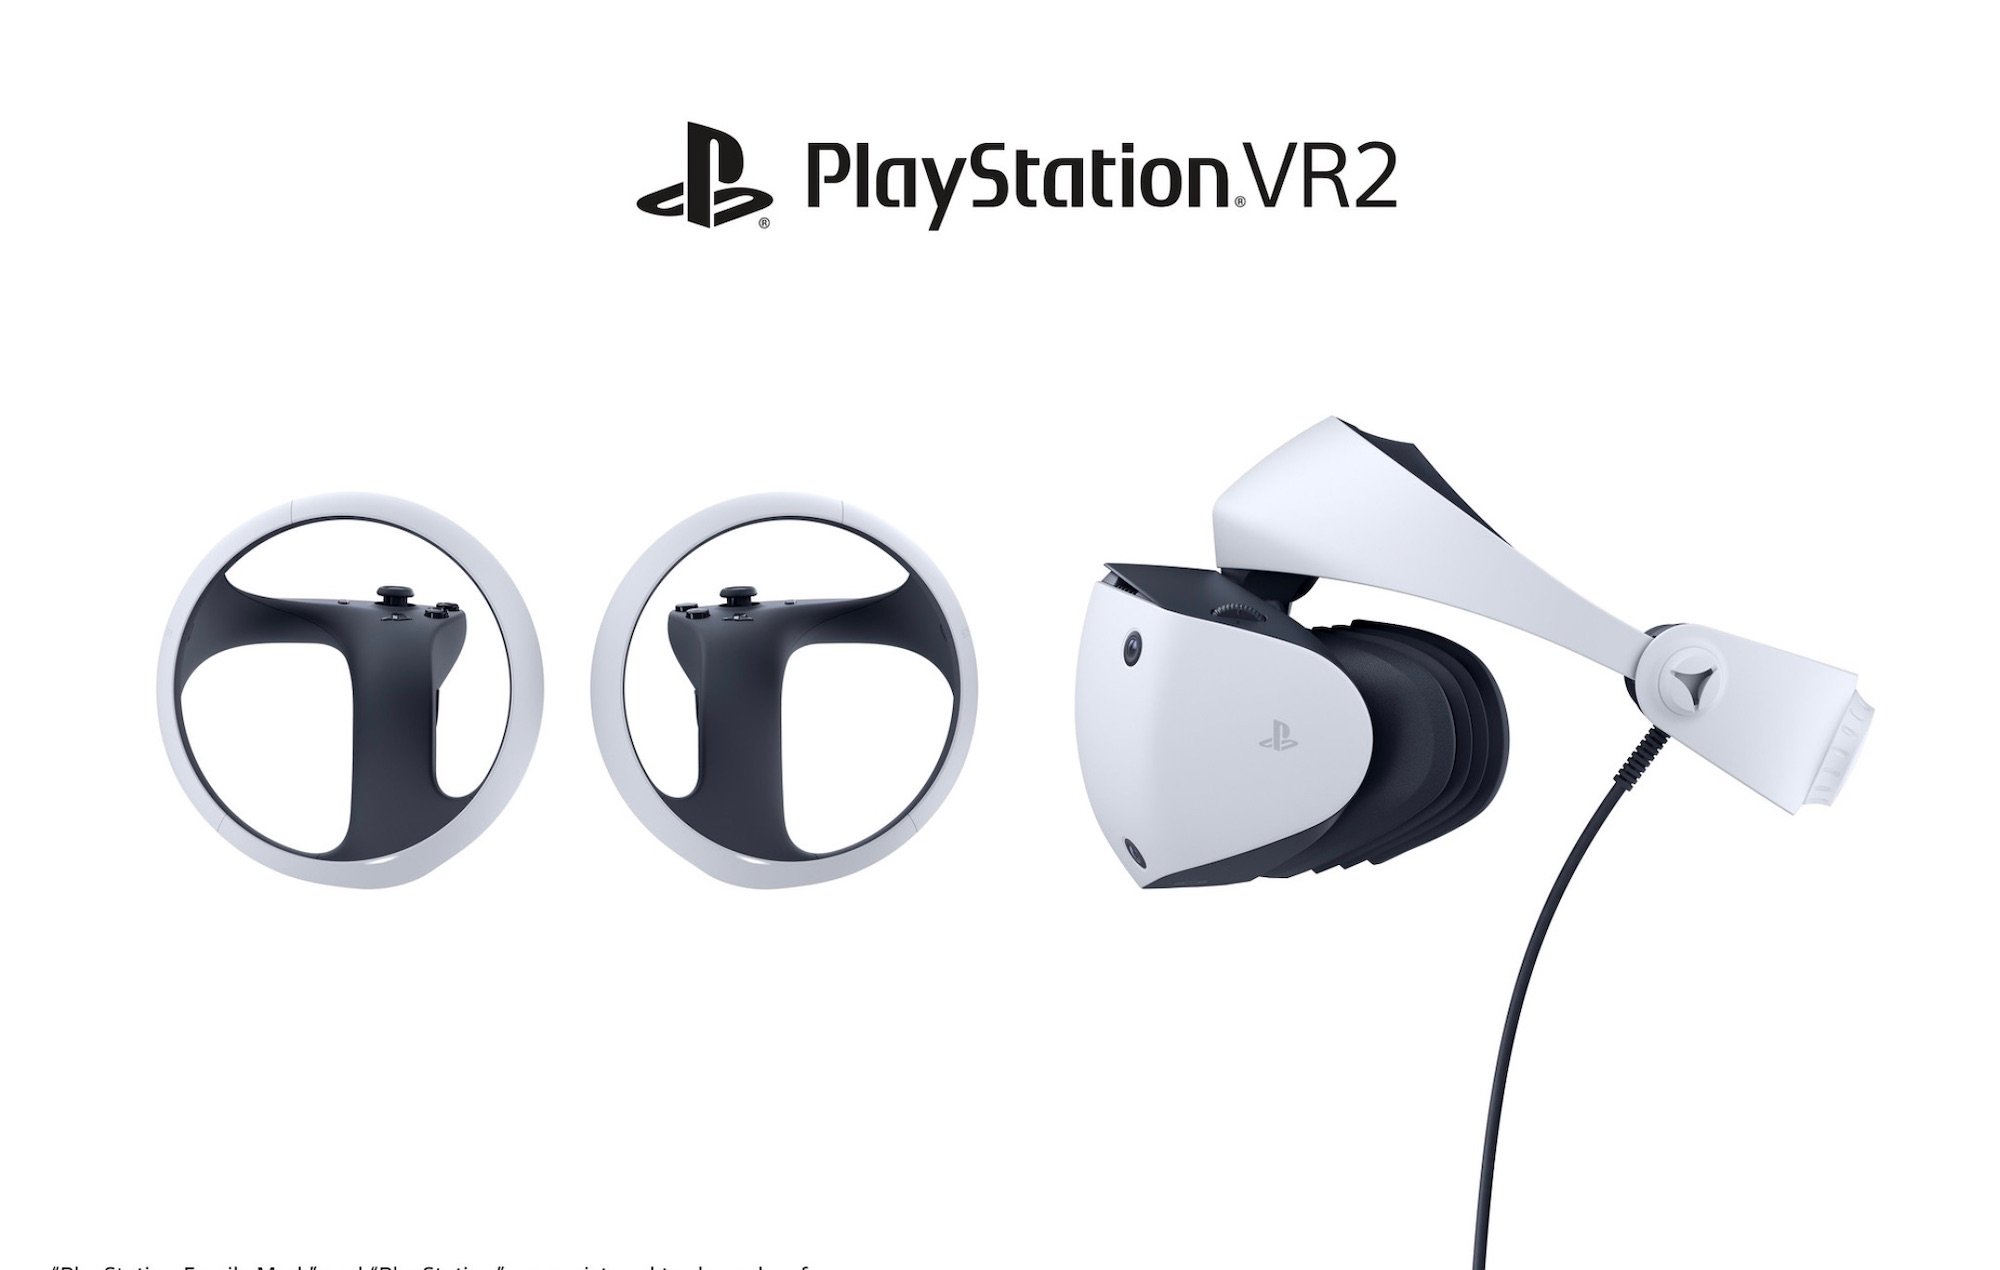 PSVR2 Currently Compatible With PC As Virtual Monitor